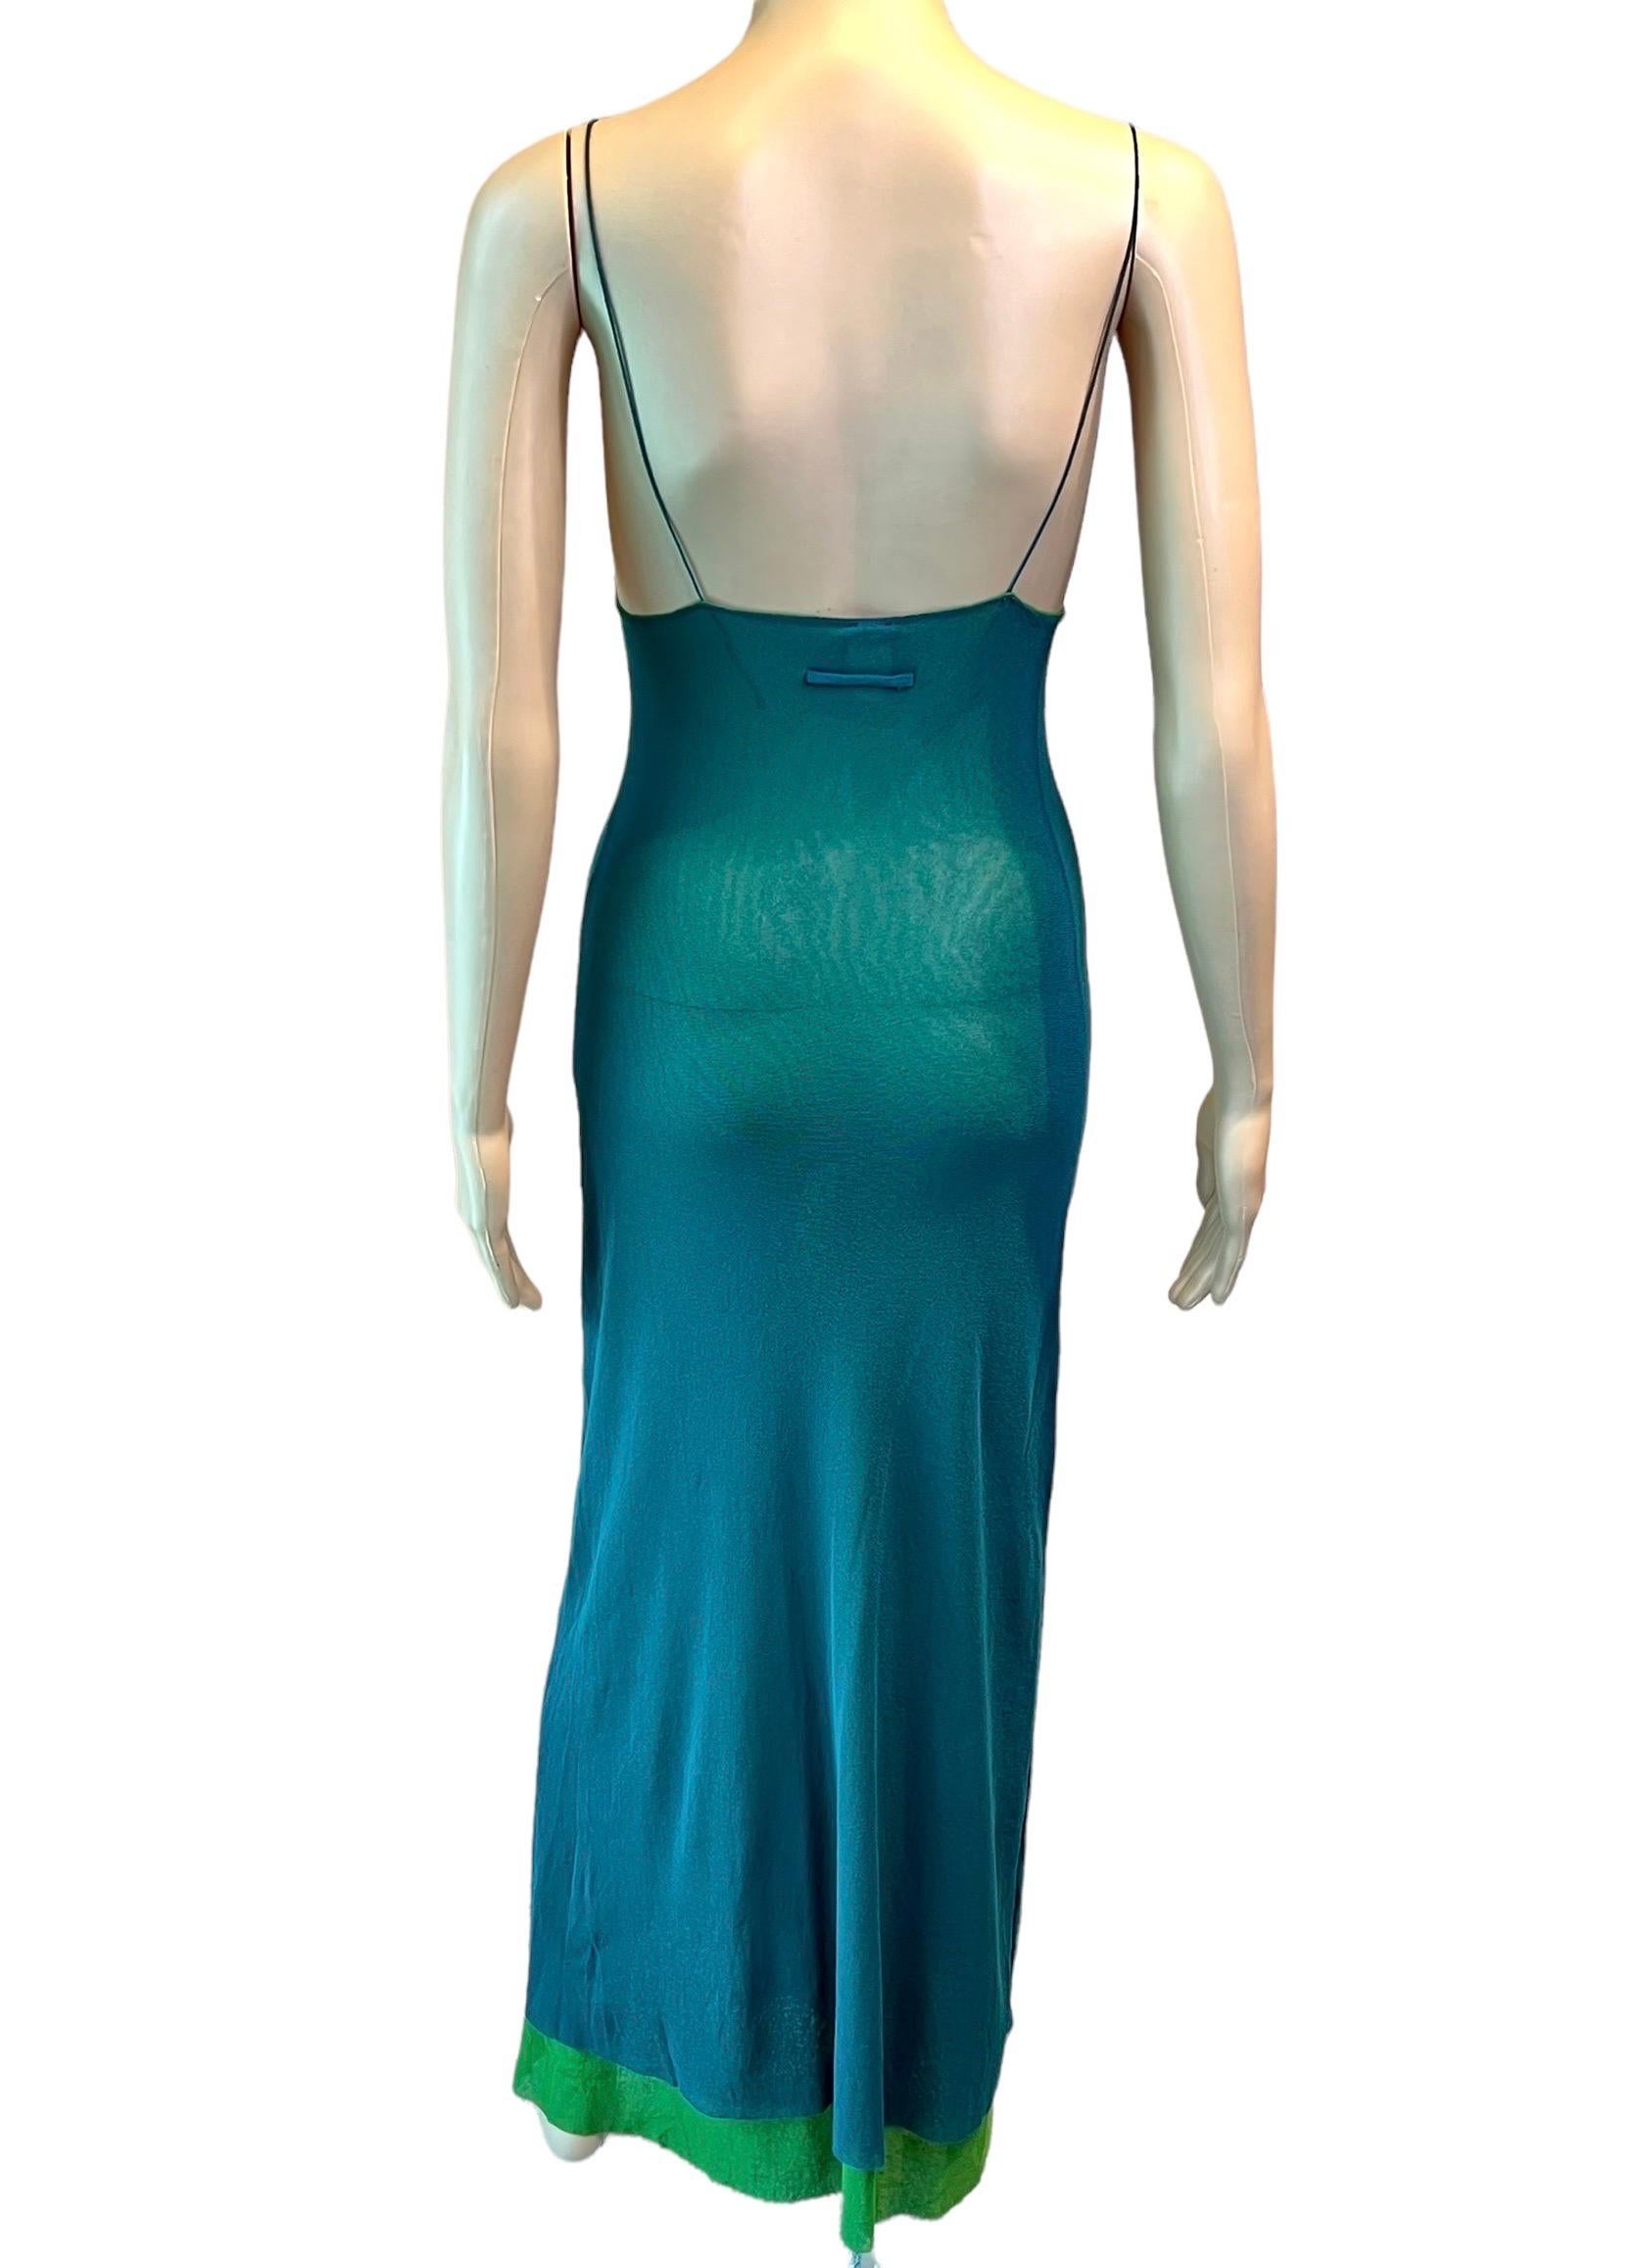 Jean Paul Gaultier Soleil Cutout Semi-Sheer Bodycon Mesh Color Block Maxi Dress In Good Condition For Sale In Naples, FL